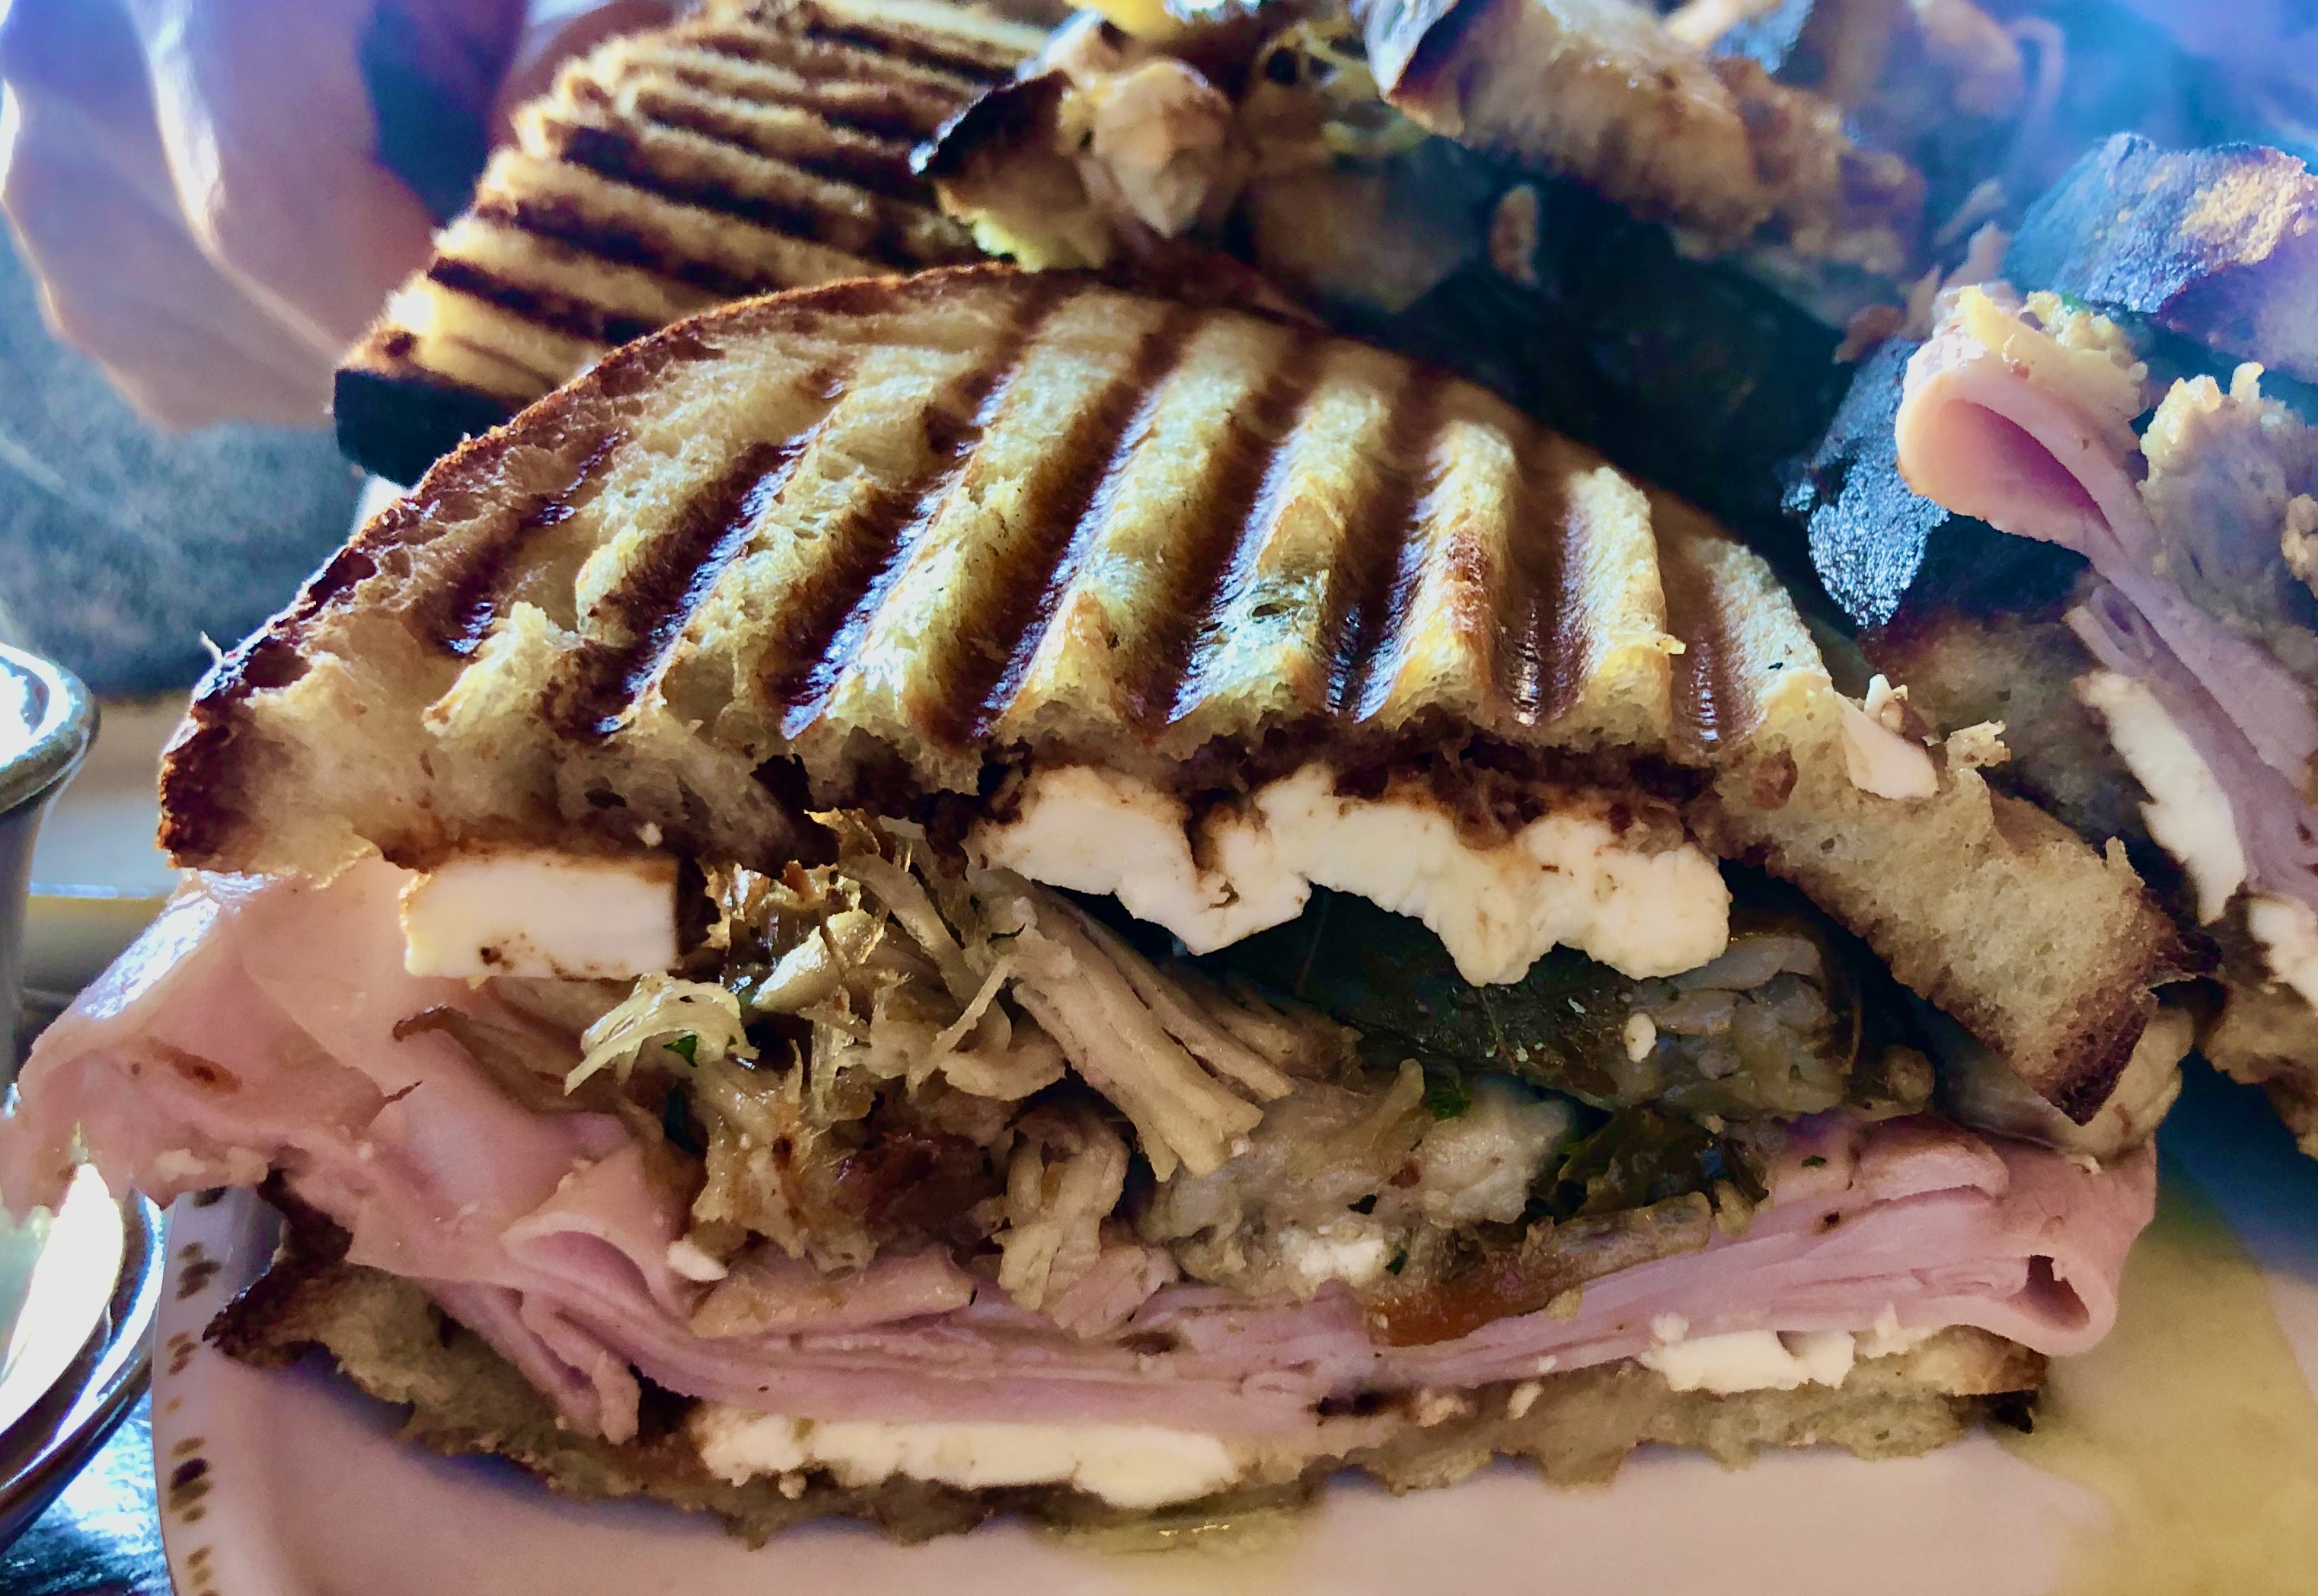 New sandwich makes the at Panini Grill, named after our reelected congresswoman. No silive.com